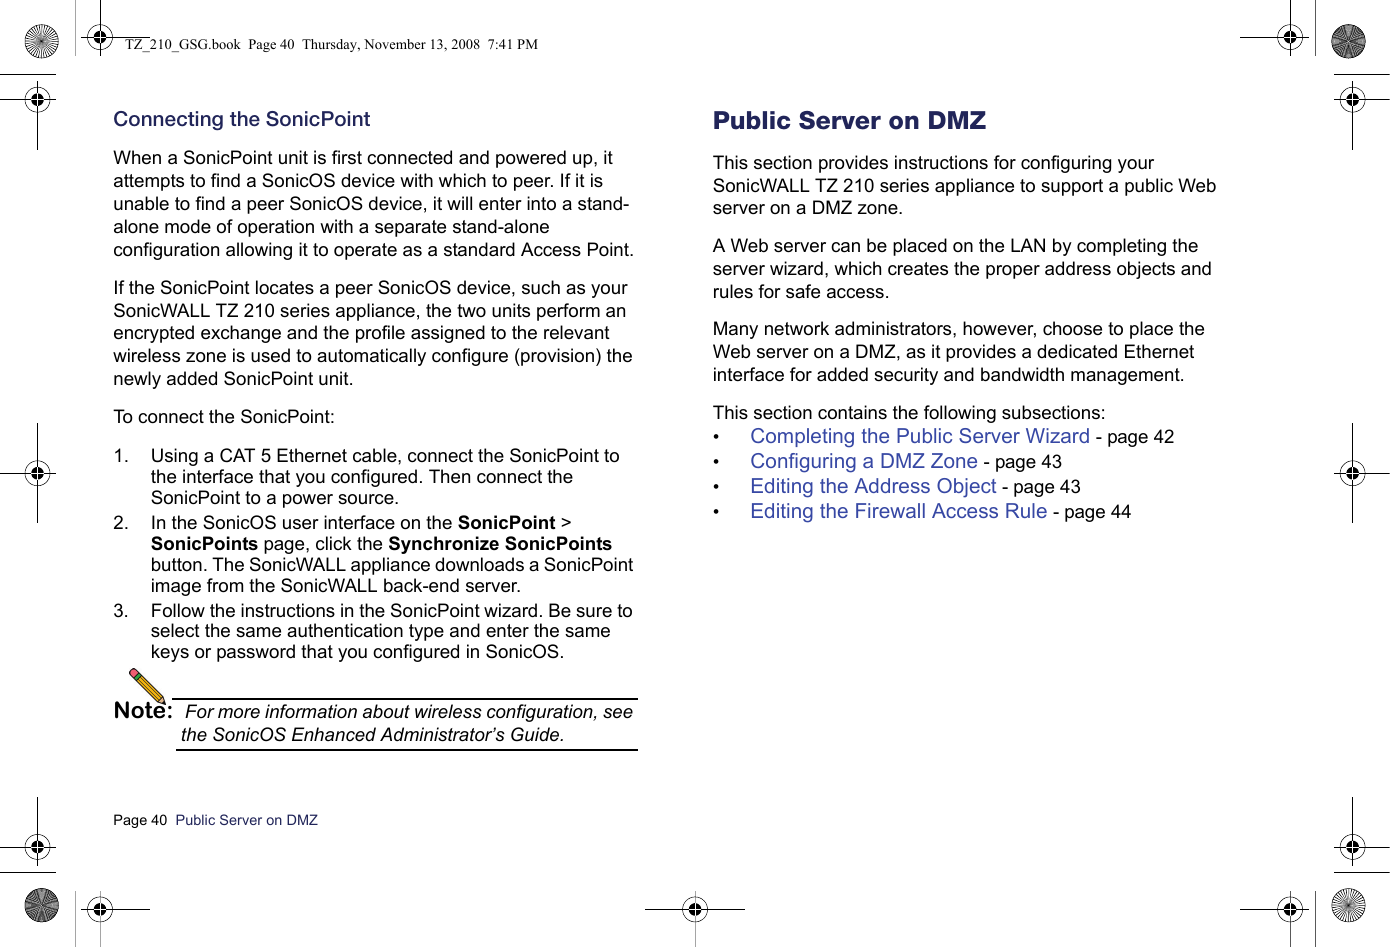 Page 40  Public Server on DMZ  Connecting the SonicPointWhen a SonicPoint unit is first connected and powered up, it attempts to find a SonicOS device with which to peer. If it is unable to find a peer SonicOS device, it will enter into a stand-alone mode of operation with a separate stand-alone configuration allowing it to operate as a standard Access Point.If the SonicPoint locates a peer SonicOS device, such as your SonicWALL TZ 210 series appliance, the two units perform an encrypted exchange and the profile assigned to the relevant wireless zone is used to automatically configure (provision) the newly added SonicPoint unit. To connect the SonicPoint:1. Using a CAT 5 Ethernet cable, connect the SonicPoint to the interface that you configured. Then connect the SonicPoint to a power source.2. In the SonicOS user interface on the SonicPoint &gt; SonicPoints page, click the Synchronize SonicPoints button. The SonicWALL appliance downloads a SonicPoint image from the SonicWALL back-end server.3. Follow the instructions in the SonicPoint wizard. Be sure to select the same authentication type and enter the same keys or password that you configured in SonicOS.Note: For more information about wireless configuration, see the SonicOS Enhanced Administrator’s Guide.Public Server on DMZThis section provides instructions for configuring your SonicWALL TZ 210 series appliance to support a public Web server on a DMZ zone. A Web server can be placed on the LAN by completing the server wizard, which creates the proper address objects and rules for safe access. Many network administrators, however, choose to place the Web server on a DMZ, as it provides a dedicated Ethernet interface for added security and bandwidth management. This section contains the following subsections:•Completing the Public Server Wizard - page 42•Configuring a DMZ Zone - page 43•Editing the Address Object - page 43•Editing the Firewall Access Rule - page 44TZ_210_GSG.book  Page 40  Thursday, November 13, 2008  7:41 PM